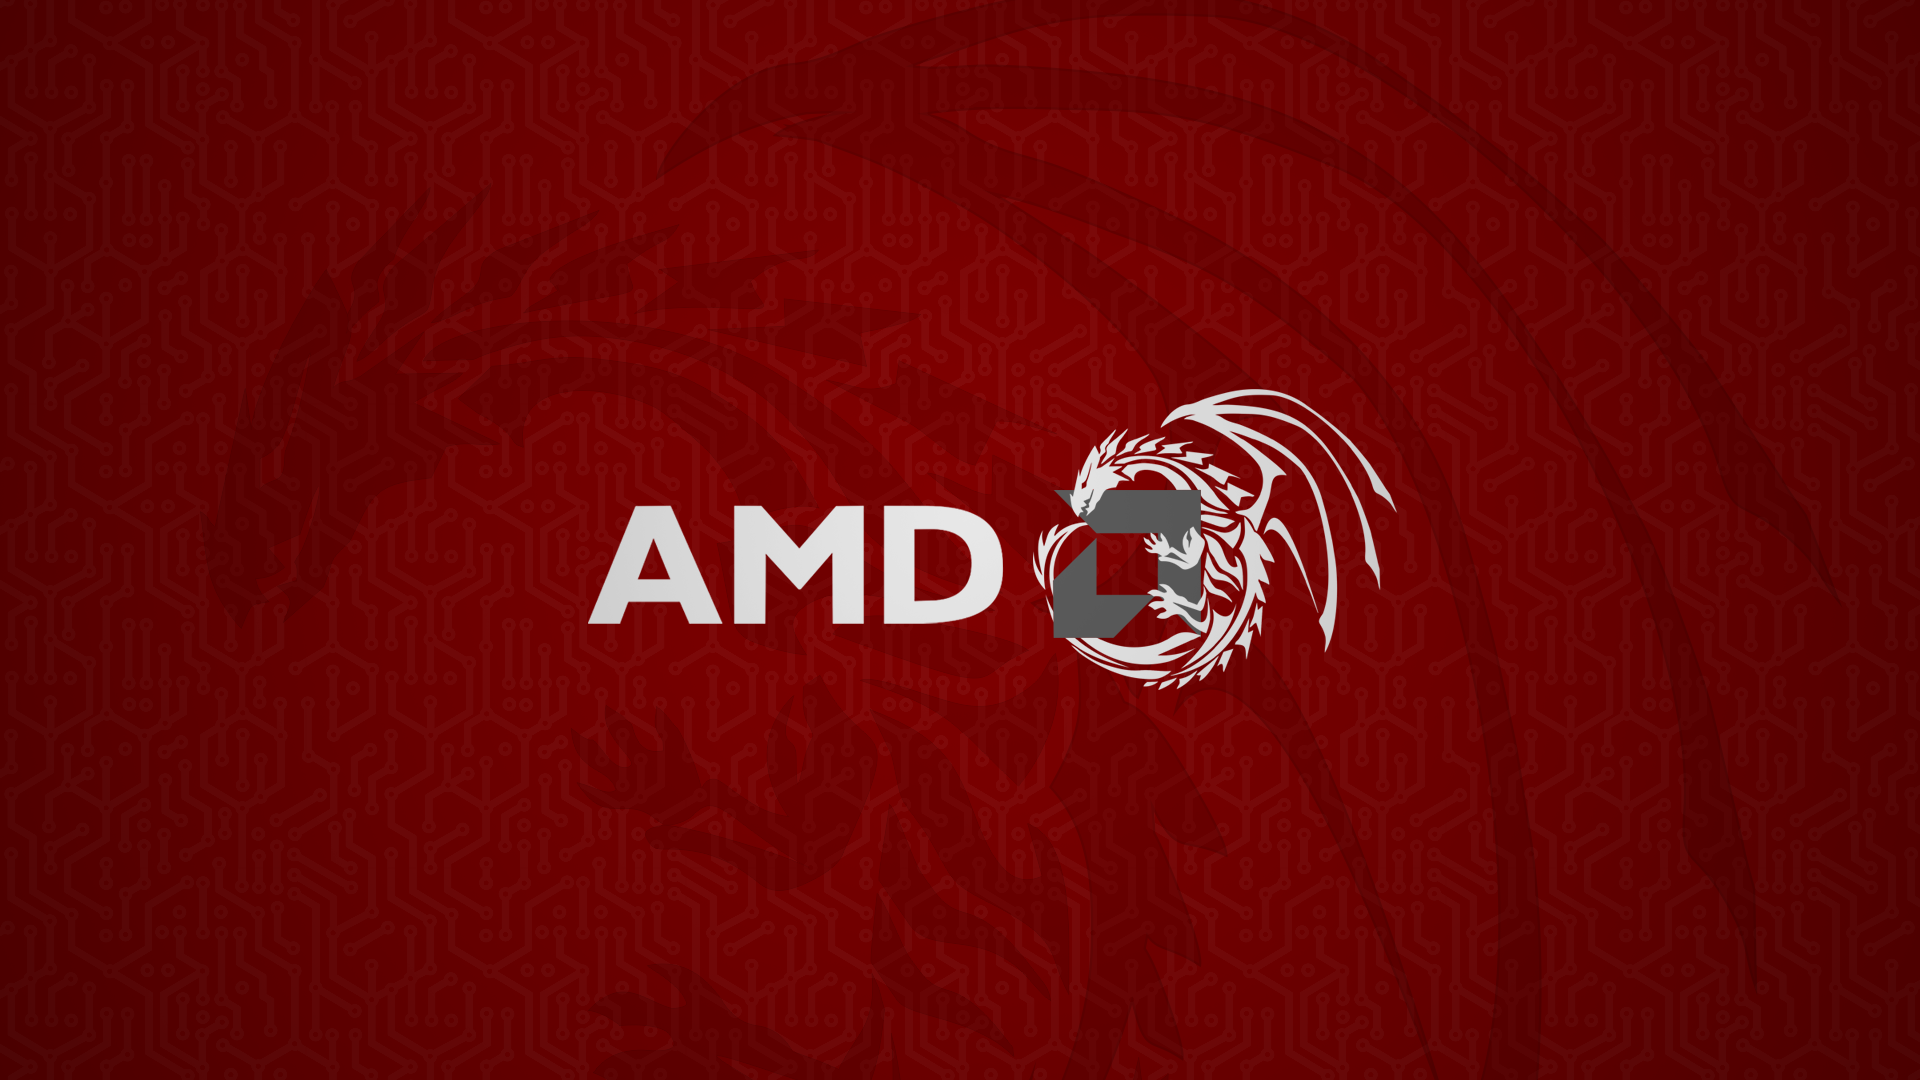 General 1920x1080 AMD dragon red hardware technology logo red background simple background